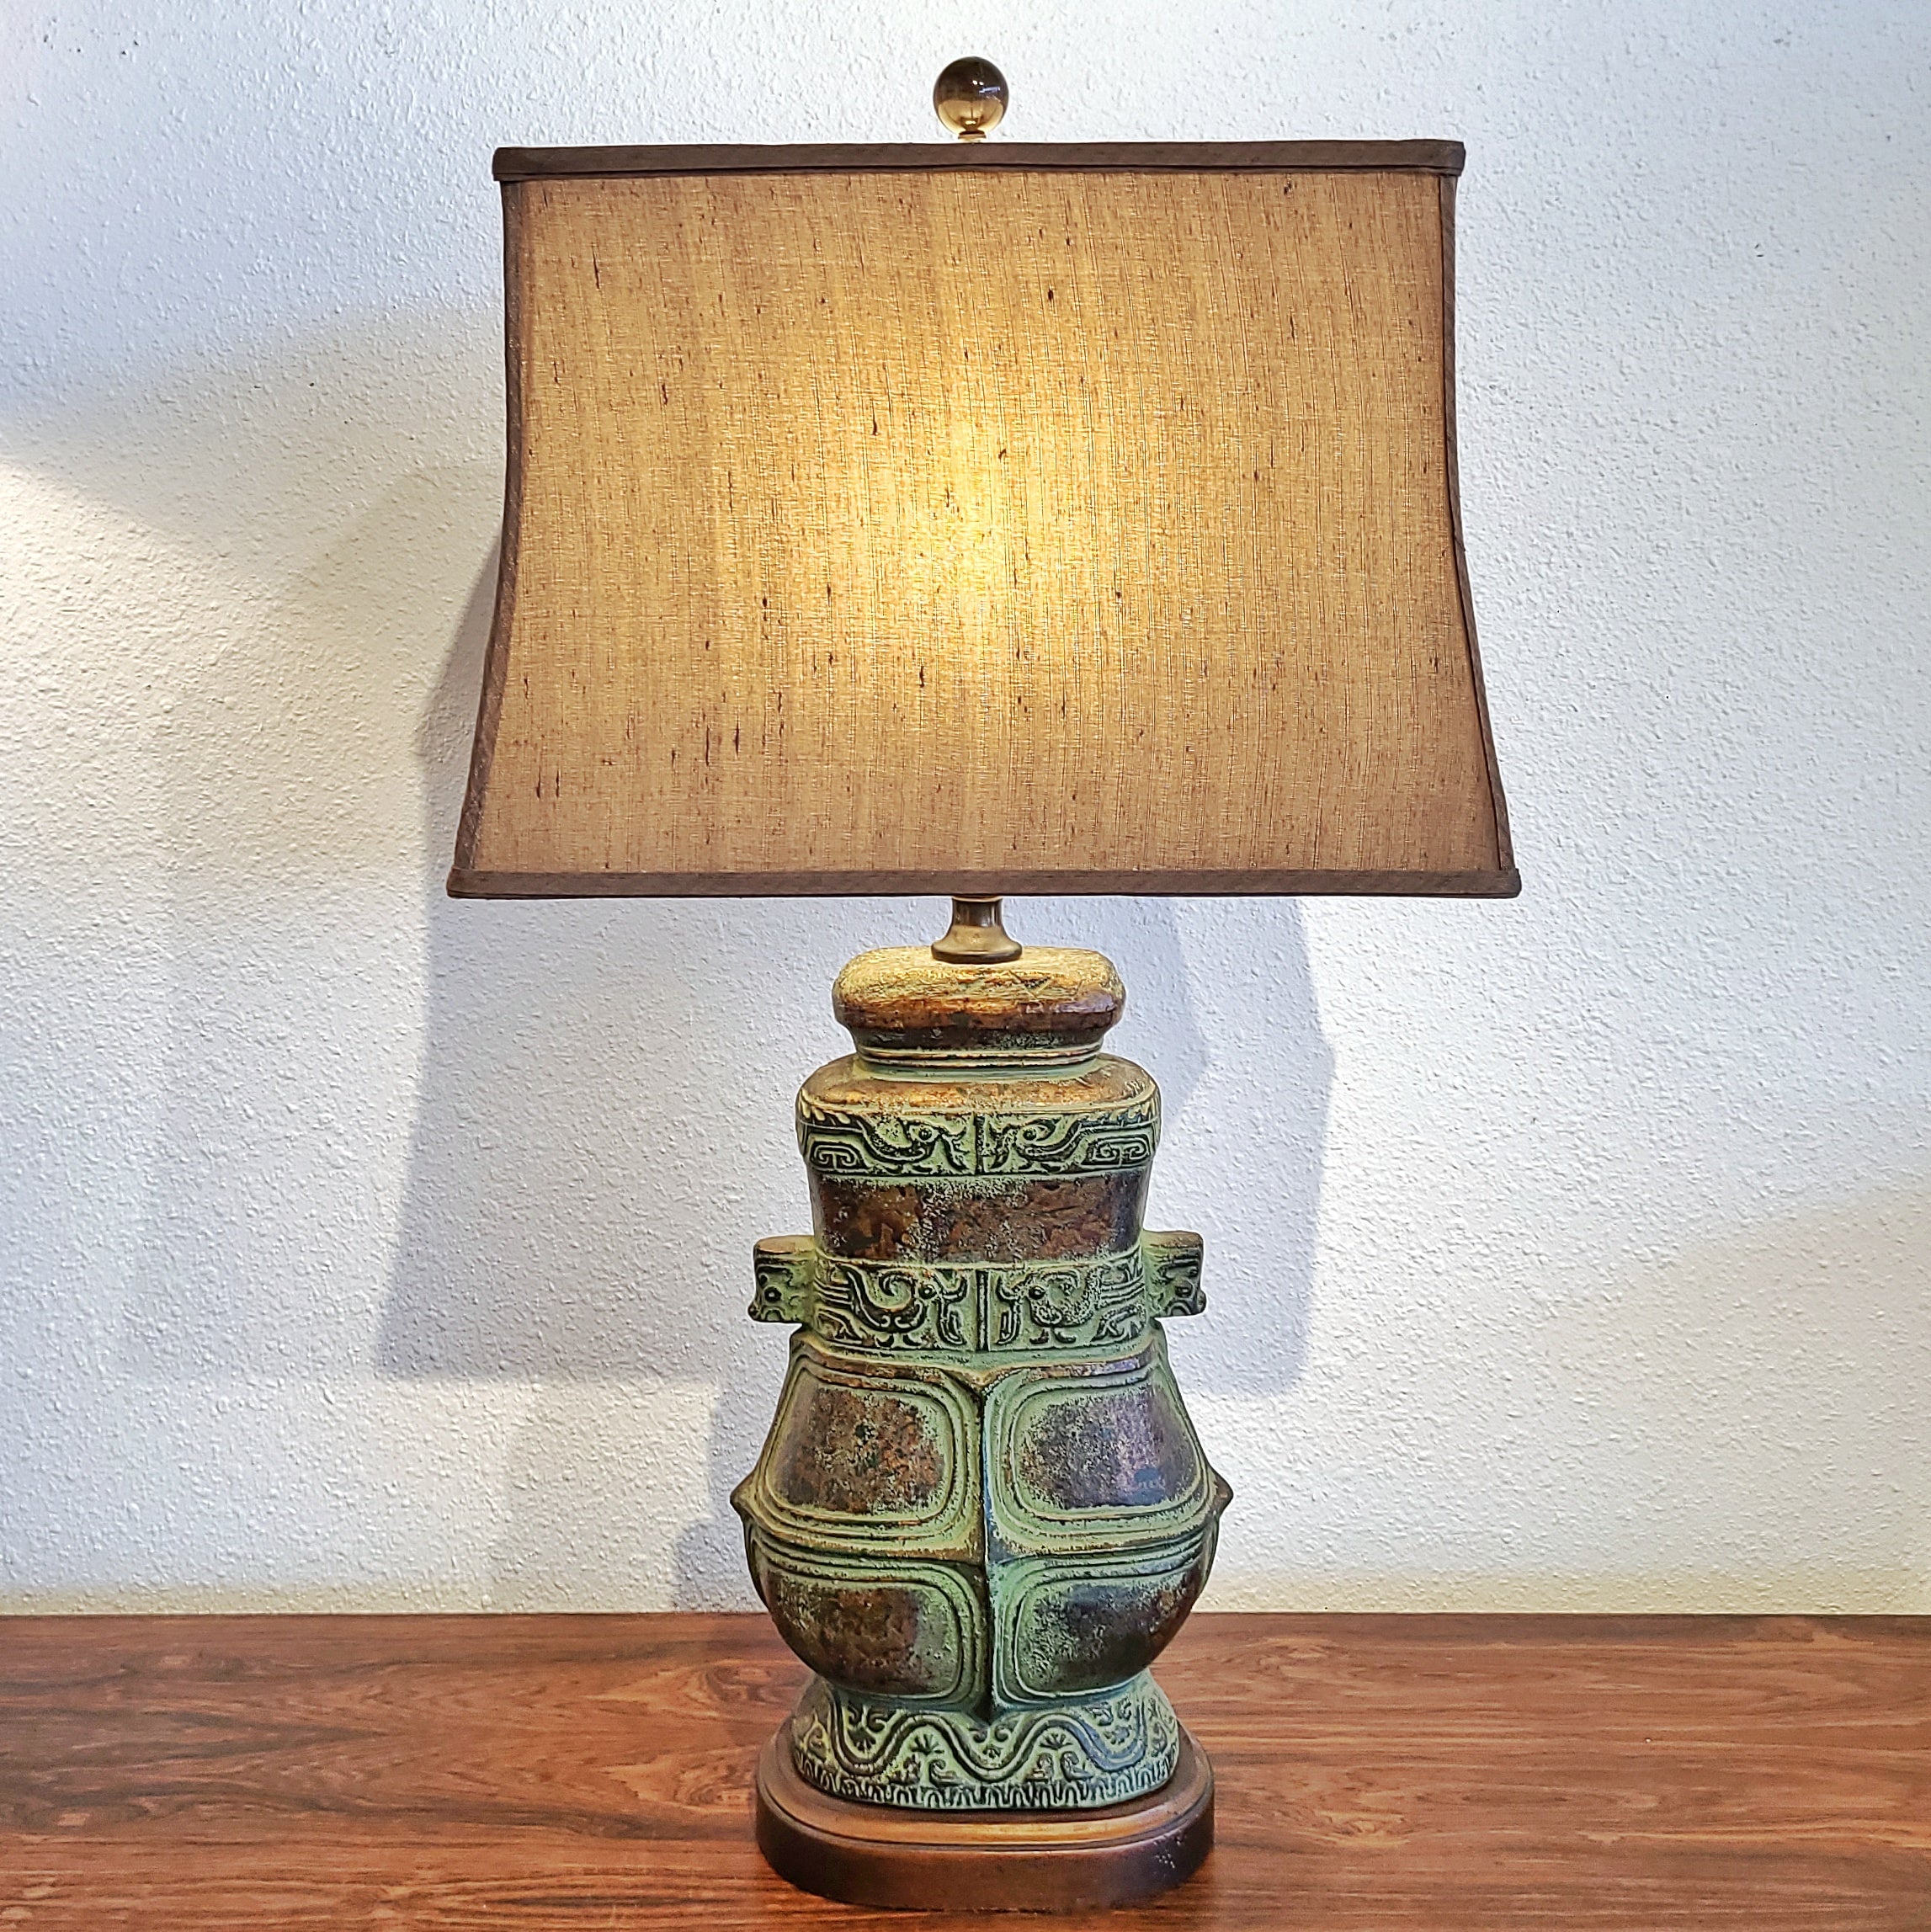 BRONZE FREDERICK COOPER TABLE LAMP IN THE STYLE OF JAMES MONT